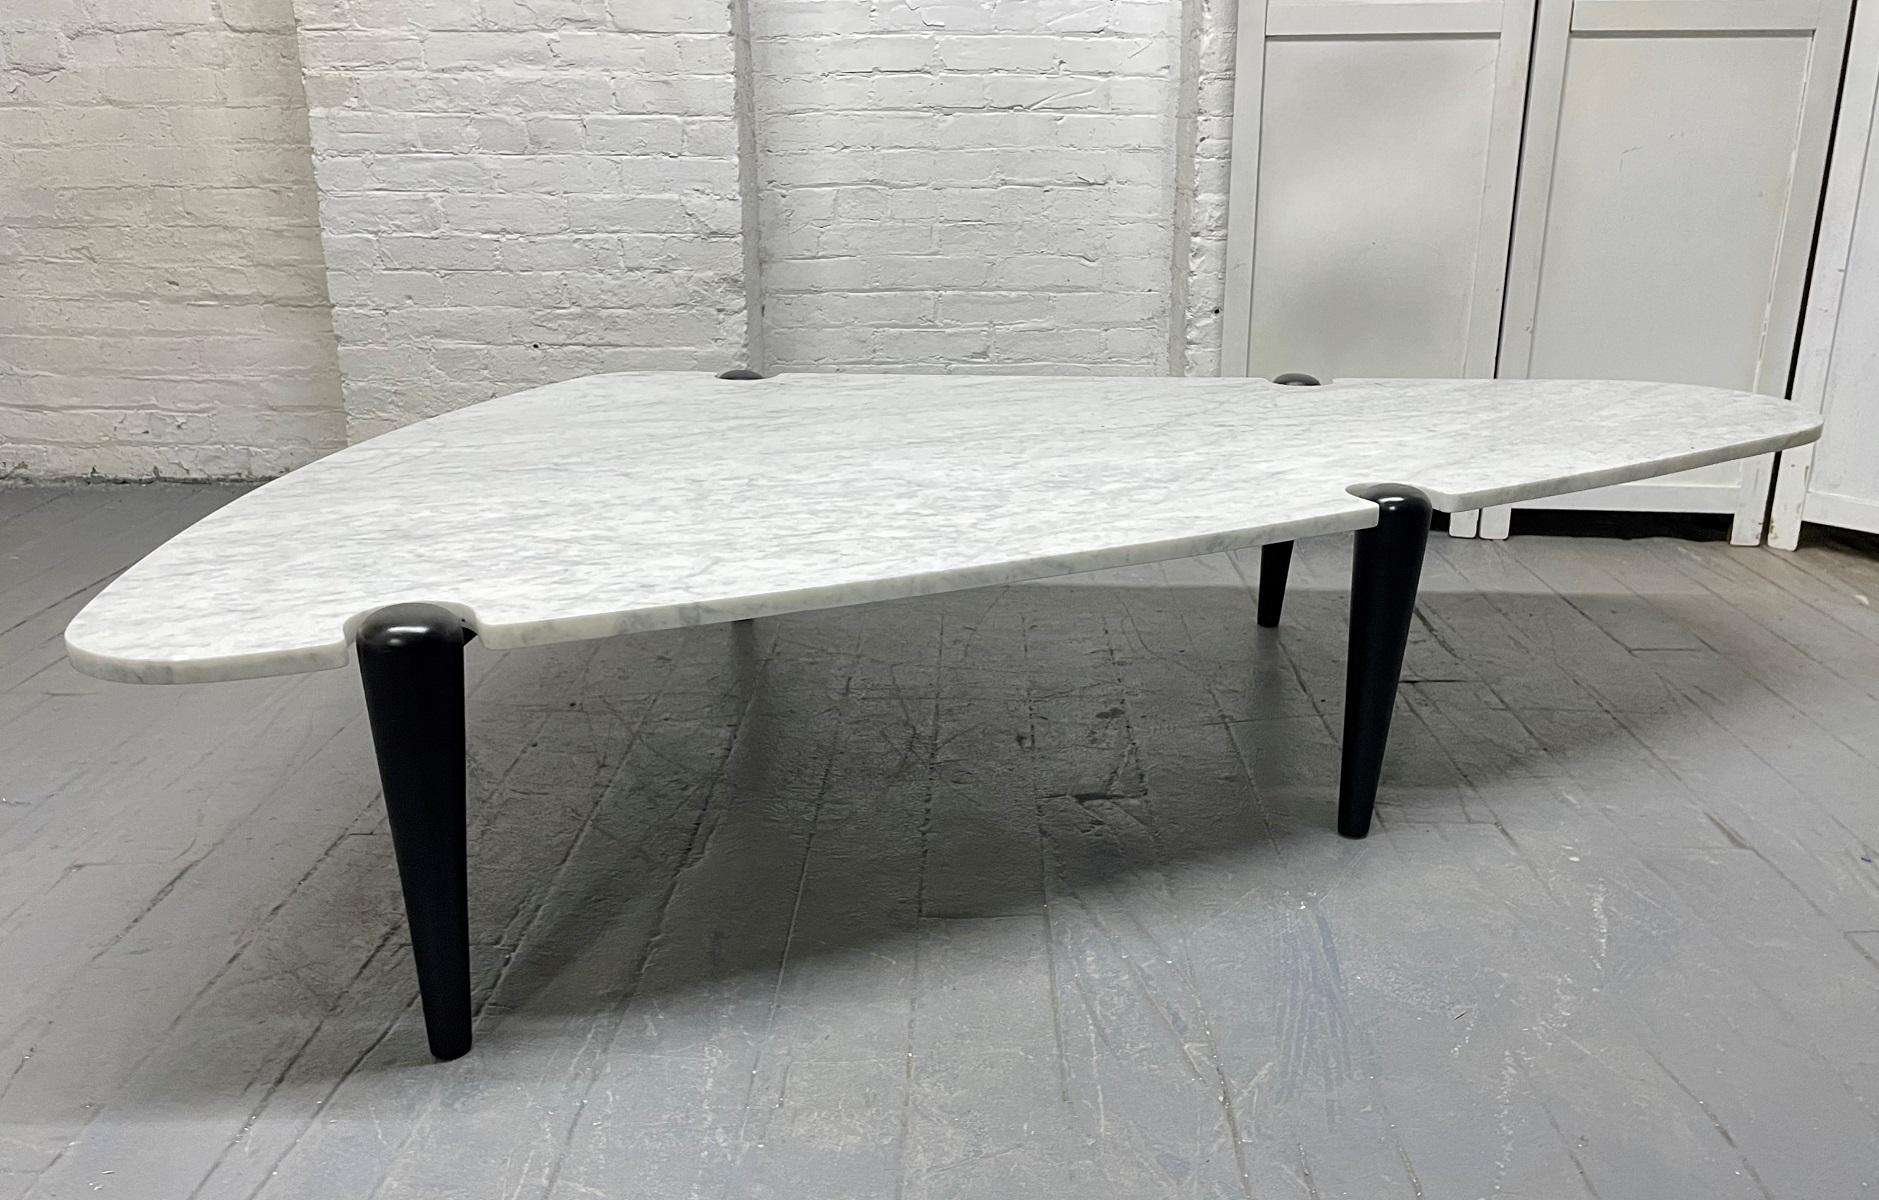 1960s sculptural Carrara marble-top coffee table. Has a black lacquered, solid walnut and iron frame. Style of T. H. Robsjohn-Gibbings. Mid-Century Modern.